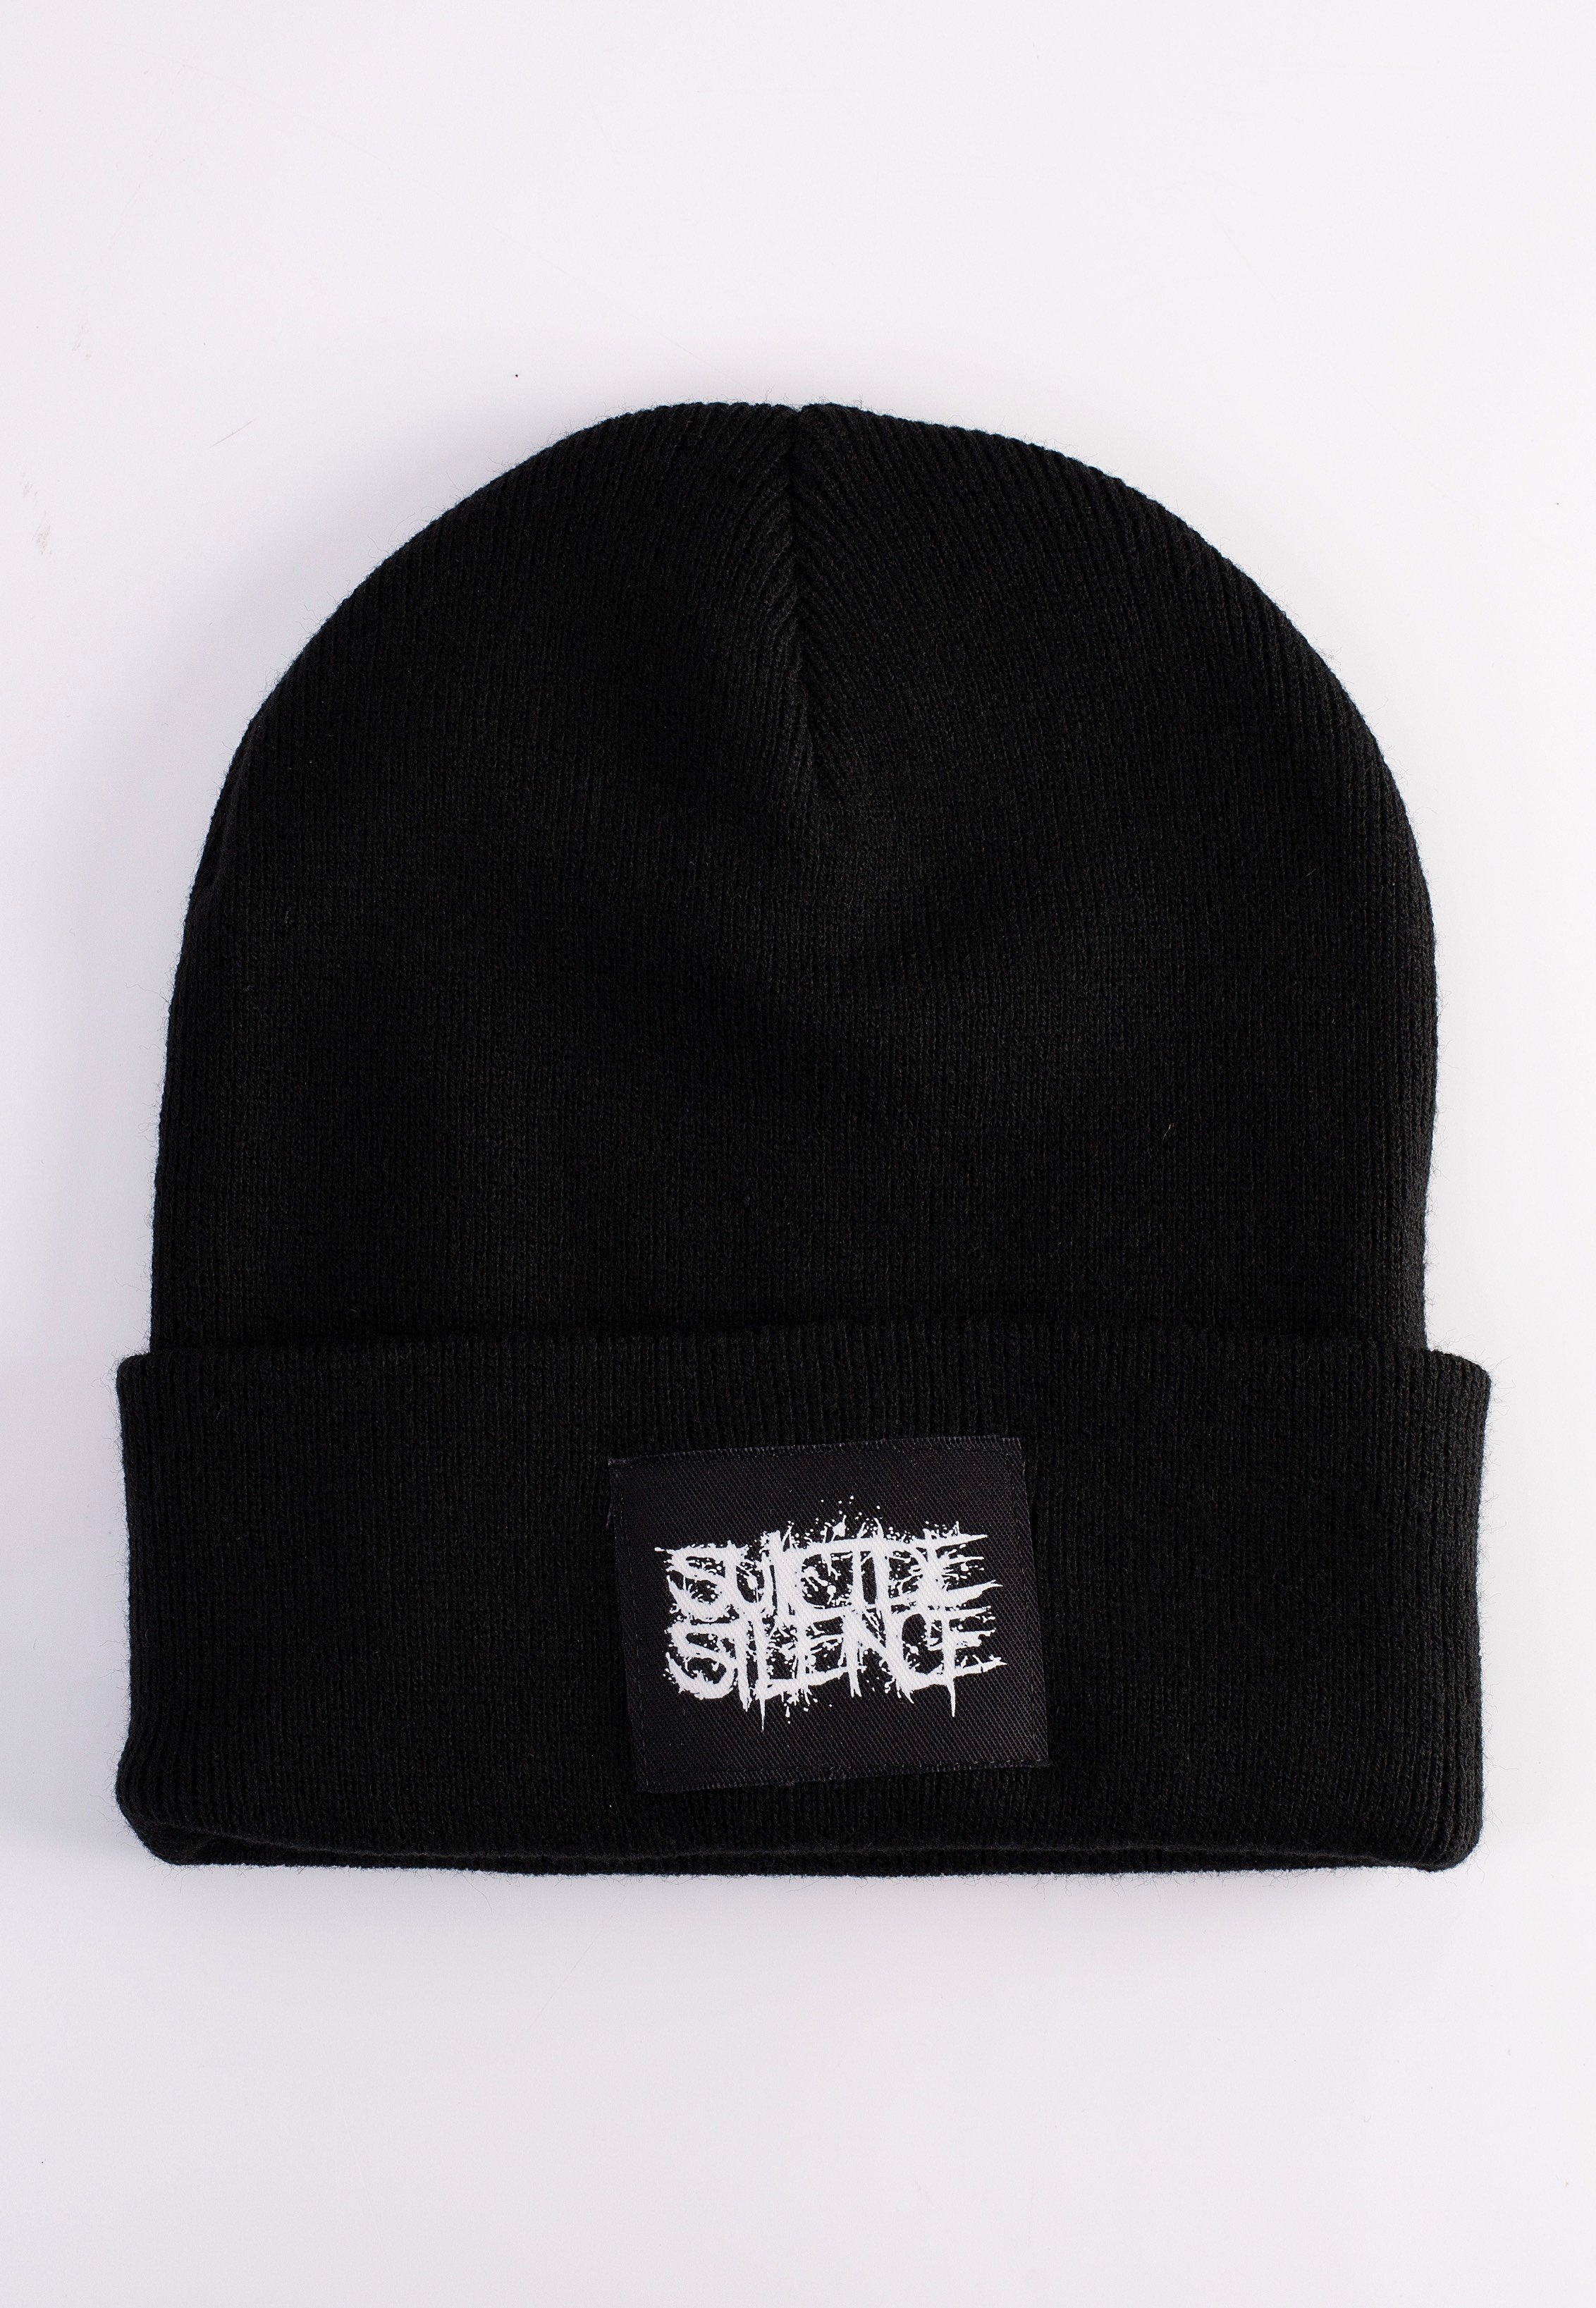 Suicide Silence - Old School Logo Patch - Beanie